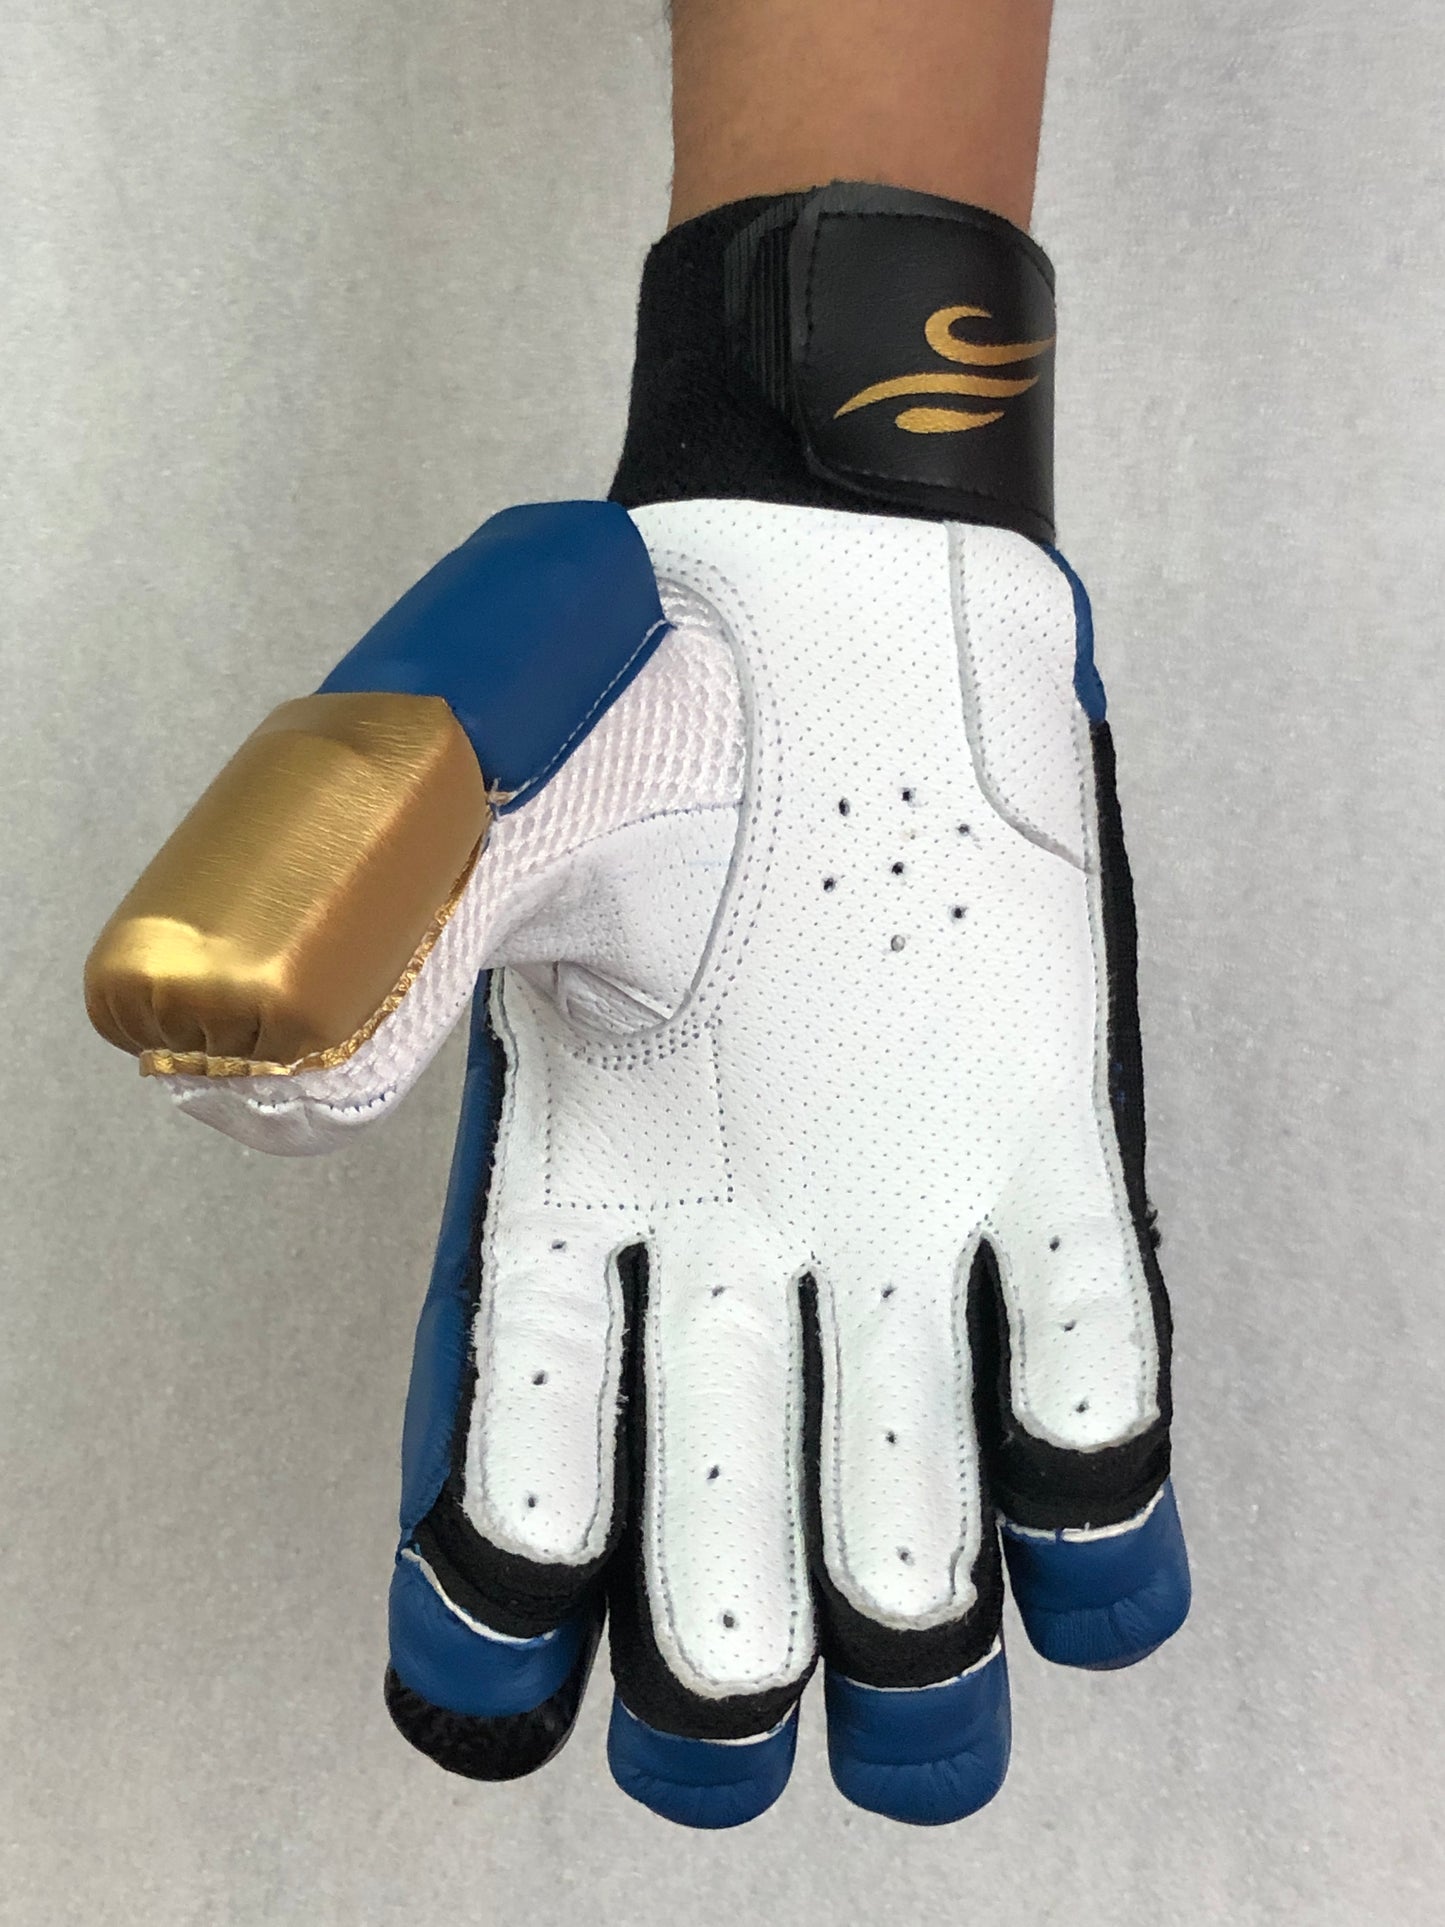 Blue/Gold Cricket Batting Gloves by Black Ash, offering light-weight high-density foam for protection, strong inserts for additional finger protection, full leather palm, and available for both right and left-hand players in blue and gold.